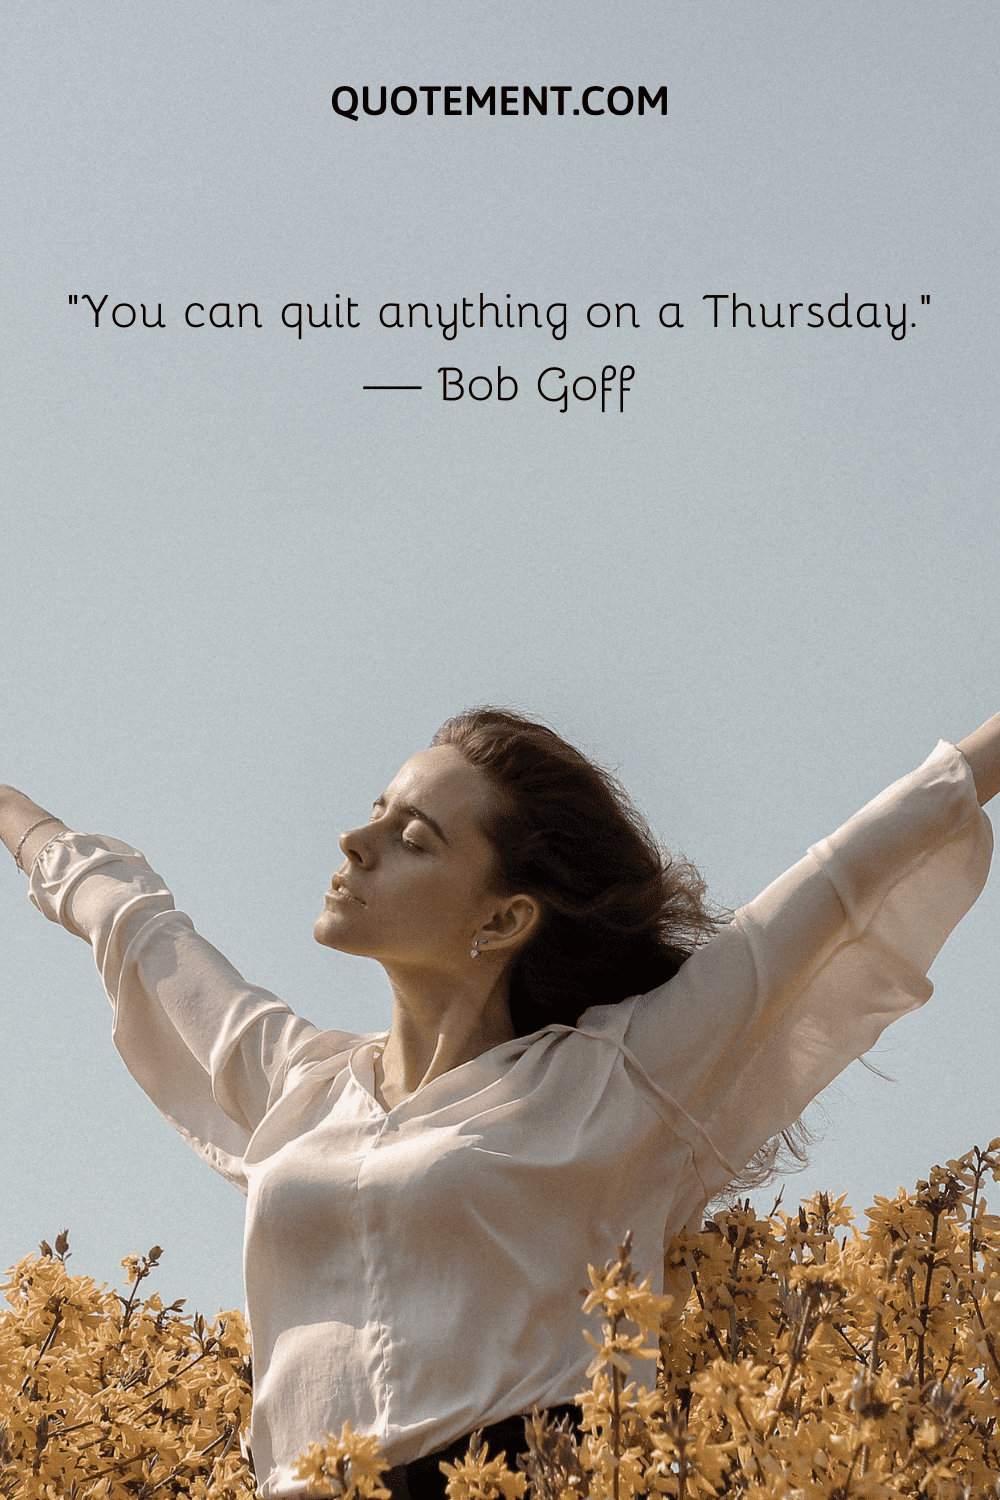 You can quit anything on a Thursday